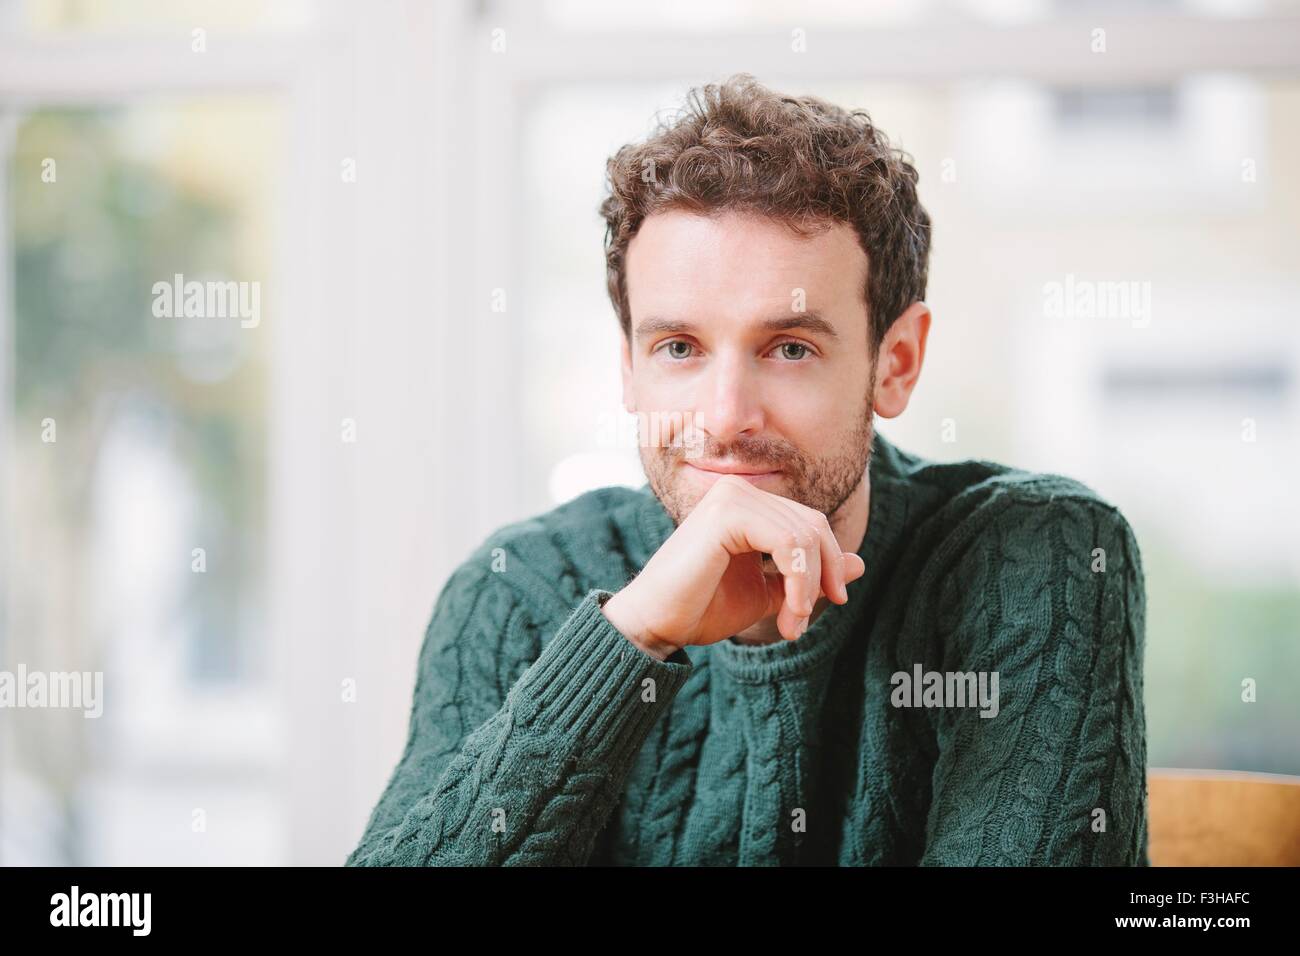 Portrait of a mid adult man Stock Photo